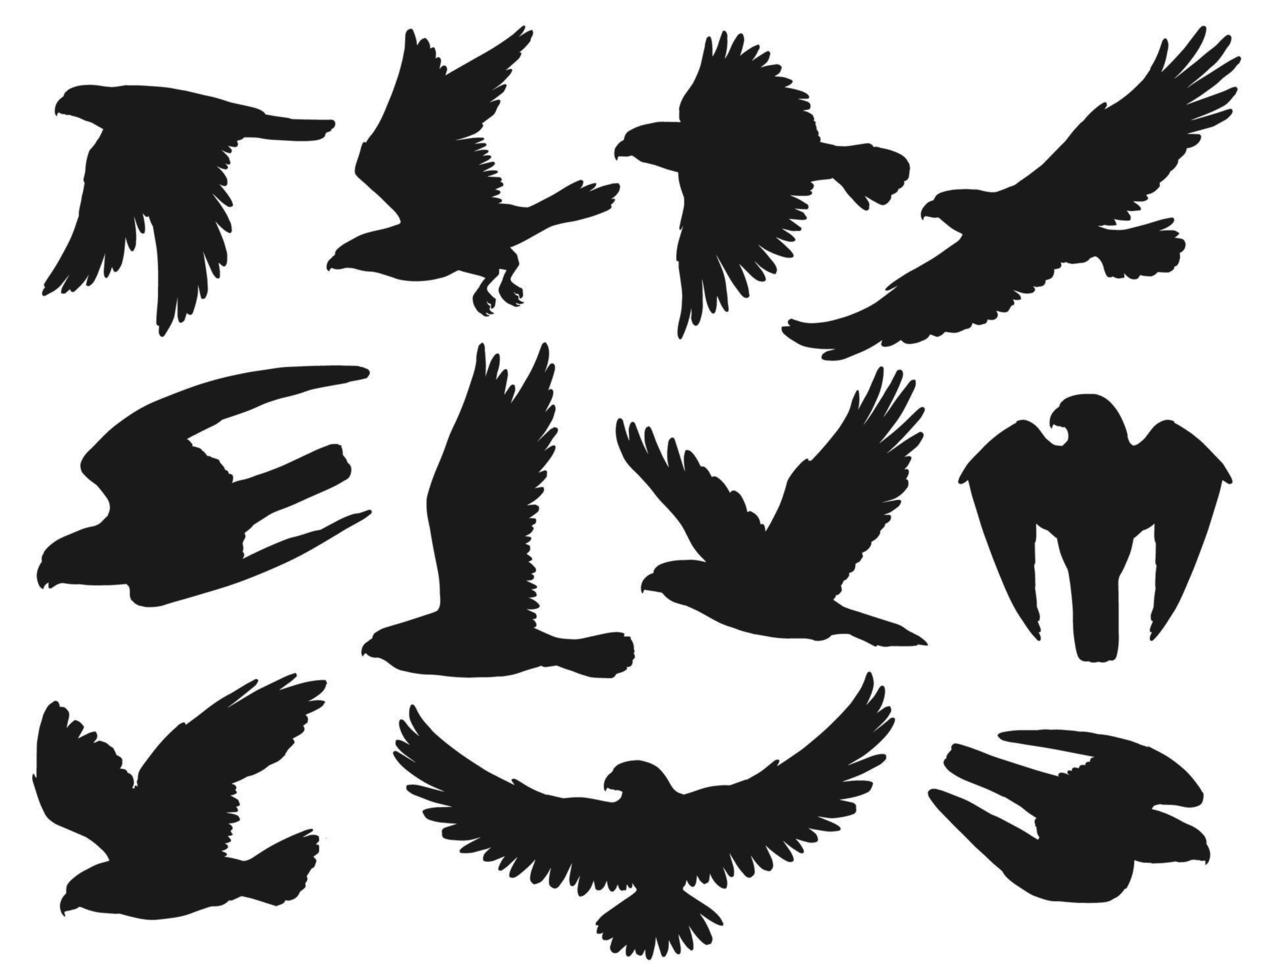 Eagles and hawks black silhouettes, vector birds